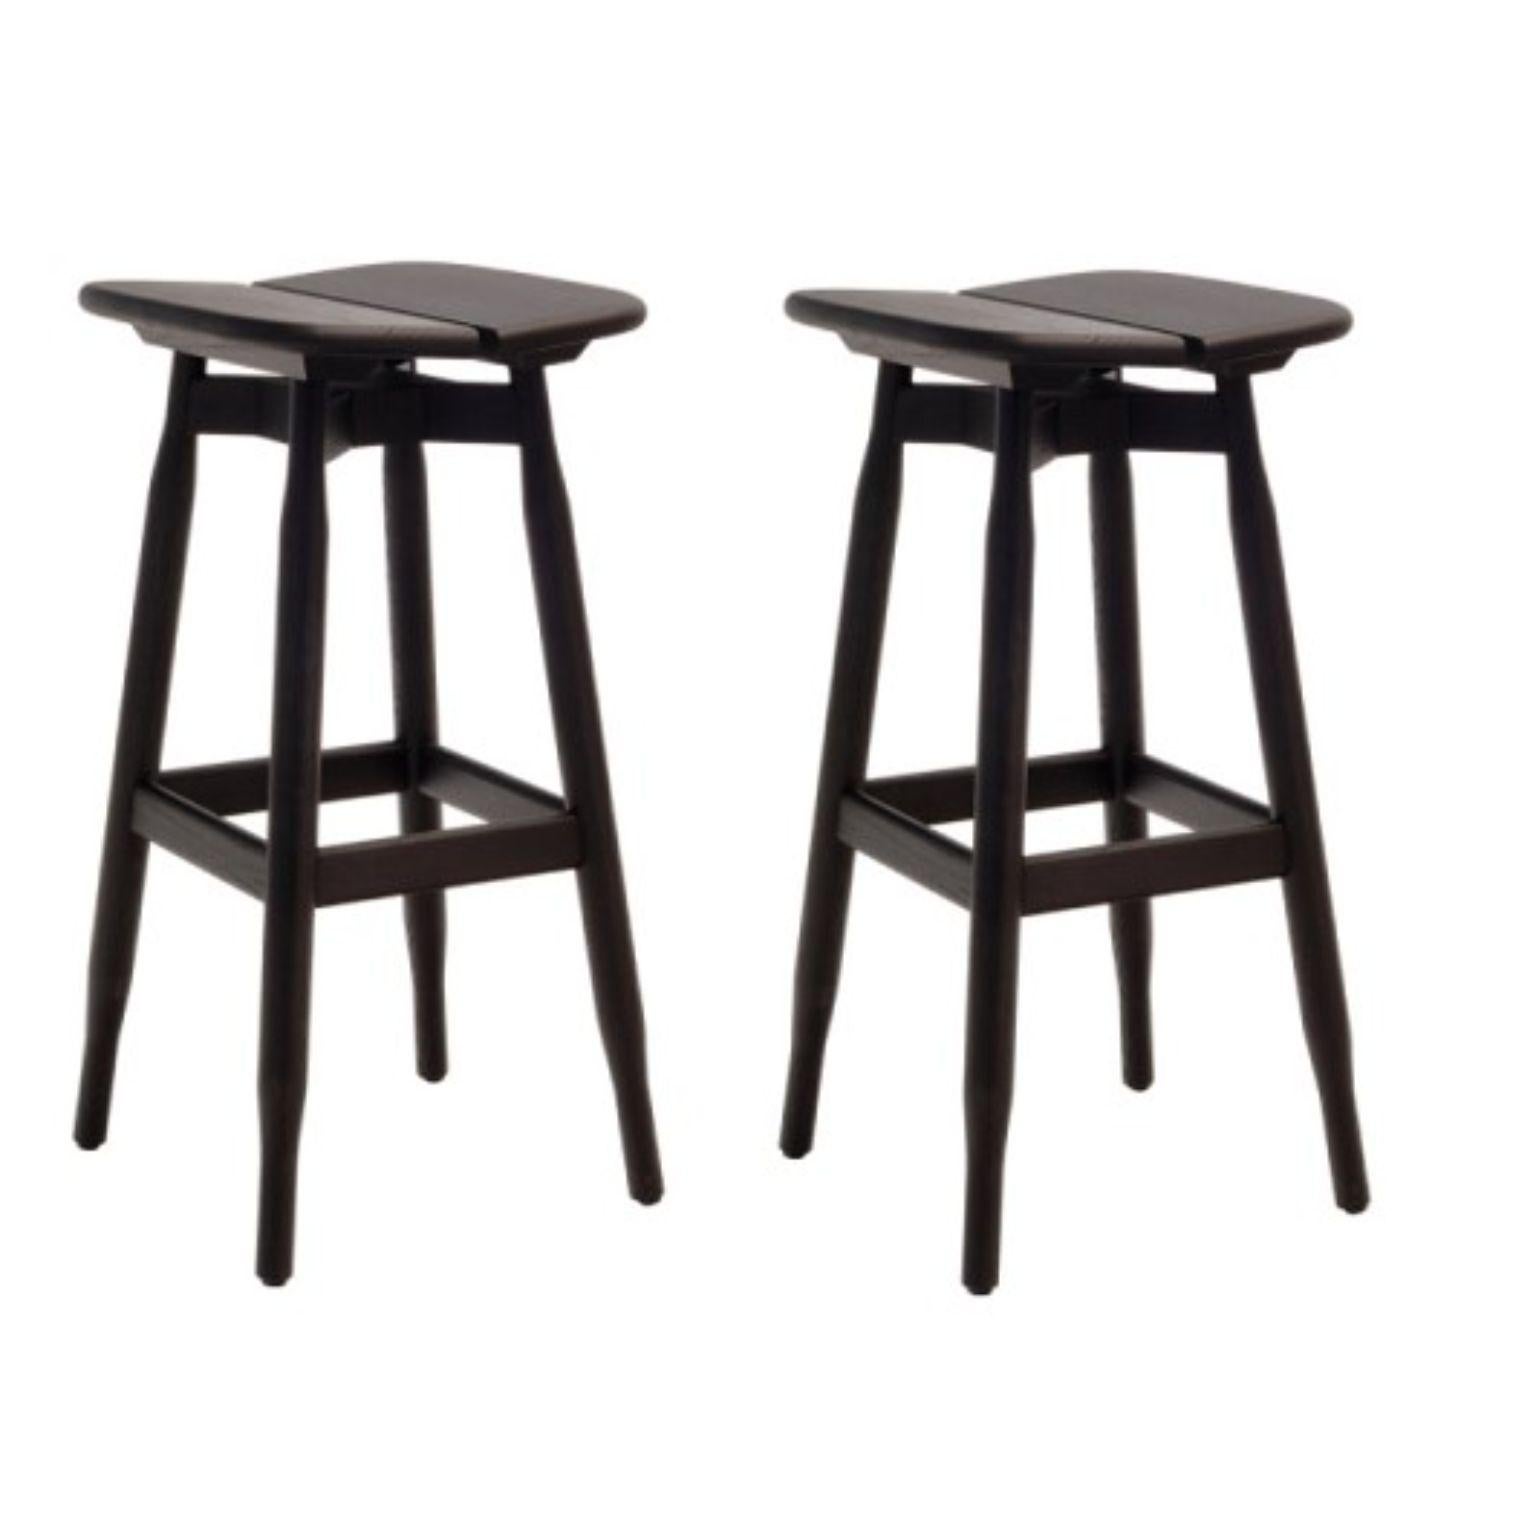 Set of 2 high black stained oak DOM stools by Marcos Zanuso Jr
Materials: High stool, structure, and seat in solid oak, natural varnished or black stained.
Technique: Lacquered metal. Natural or stained wood. 
Dimensions: D 38 x W 40 x H 74